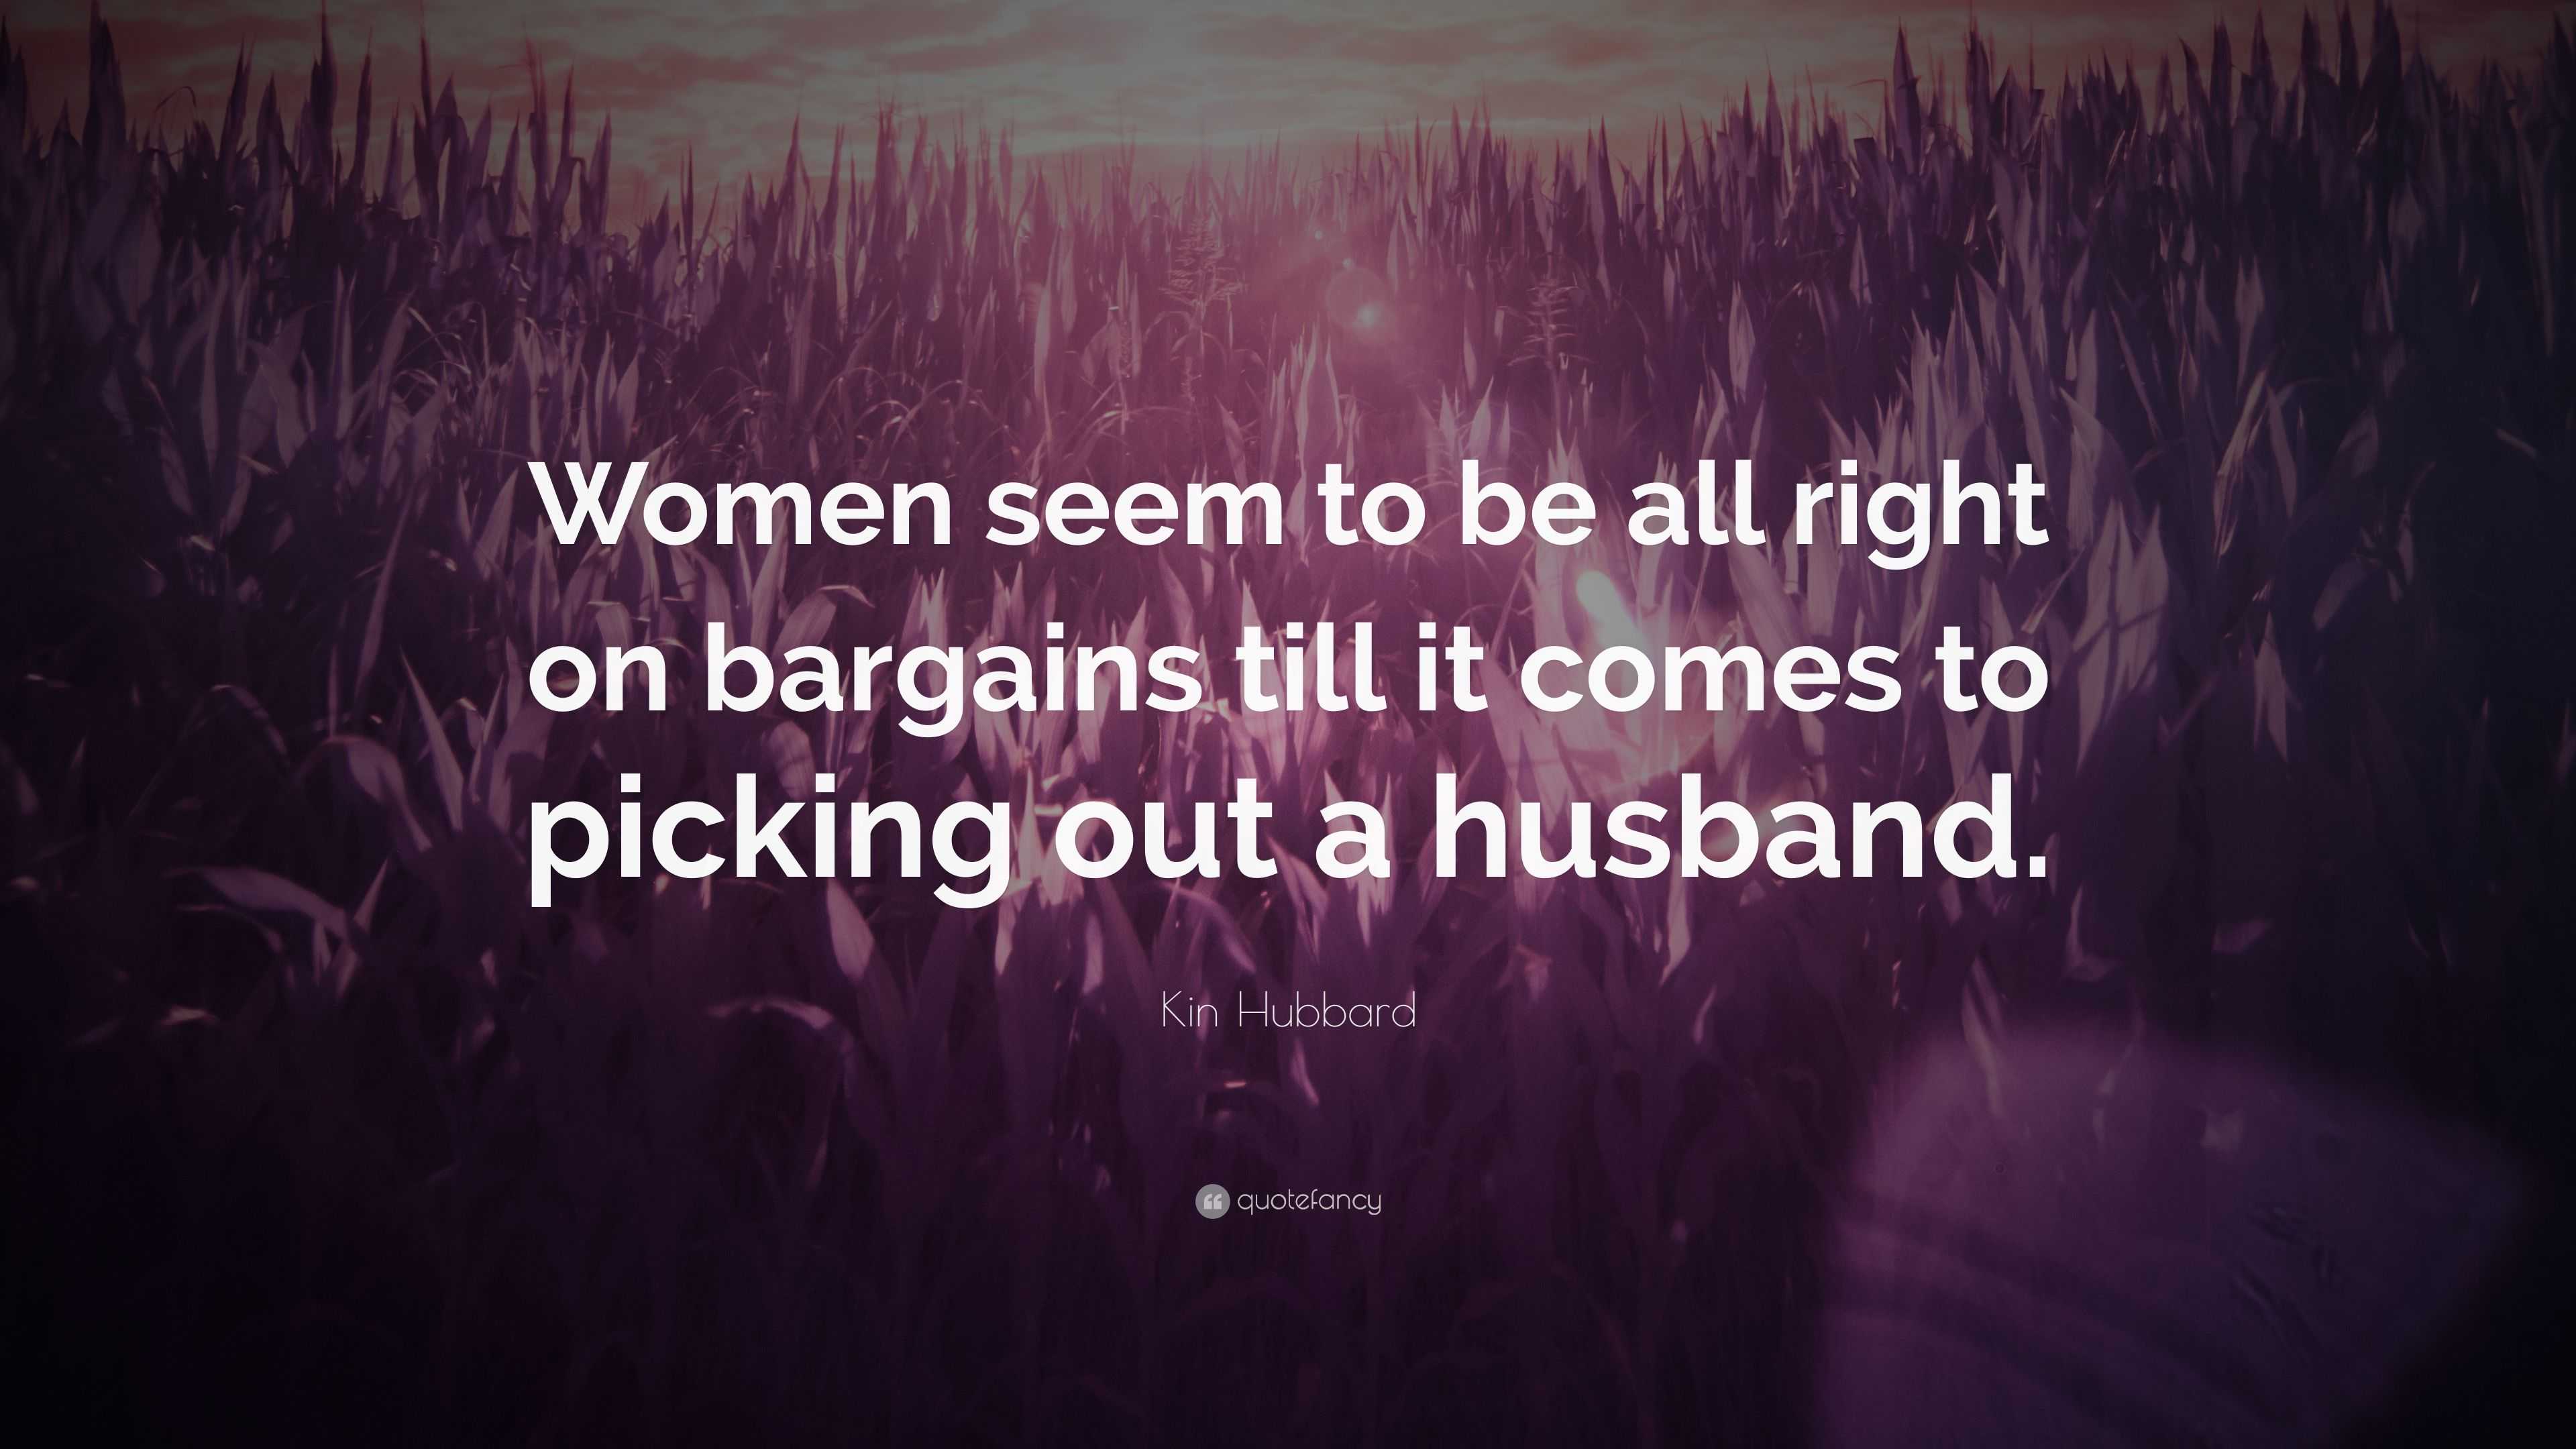 Kin Hubbard Quote: “Women seem to be all right on bargains till it comes to  picking